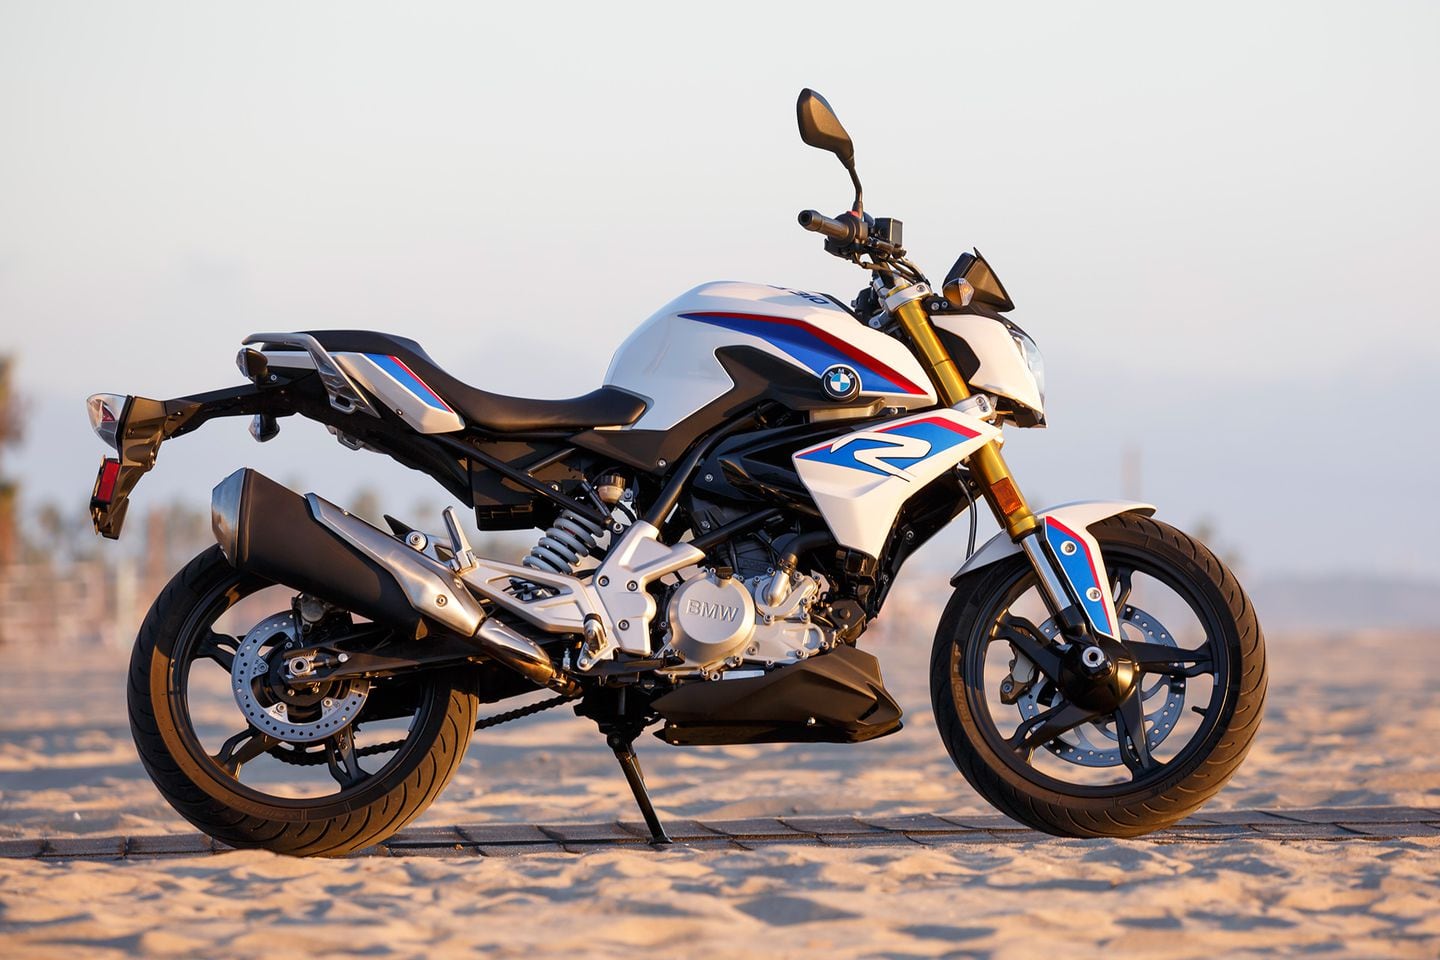 18 Bmw G 310 R First Ride Motorcycle Review Cycle World